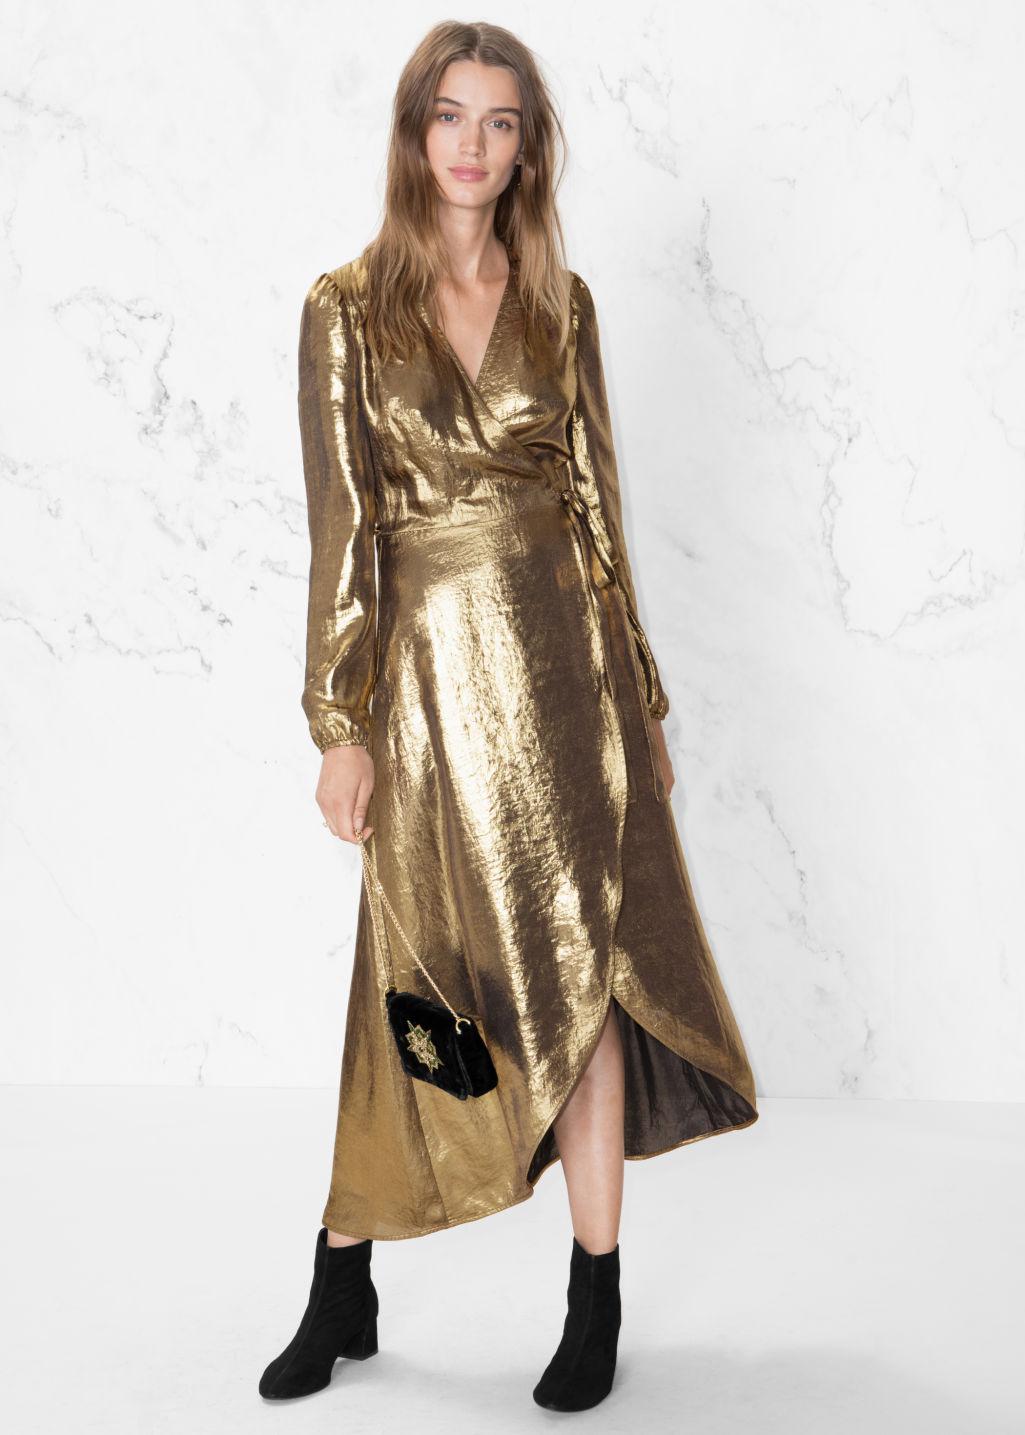 \u0026 Other Stories Synthetic Wrap Dress in Gold (Metallic) | Lyst